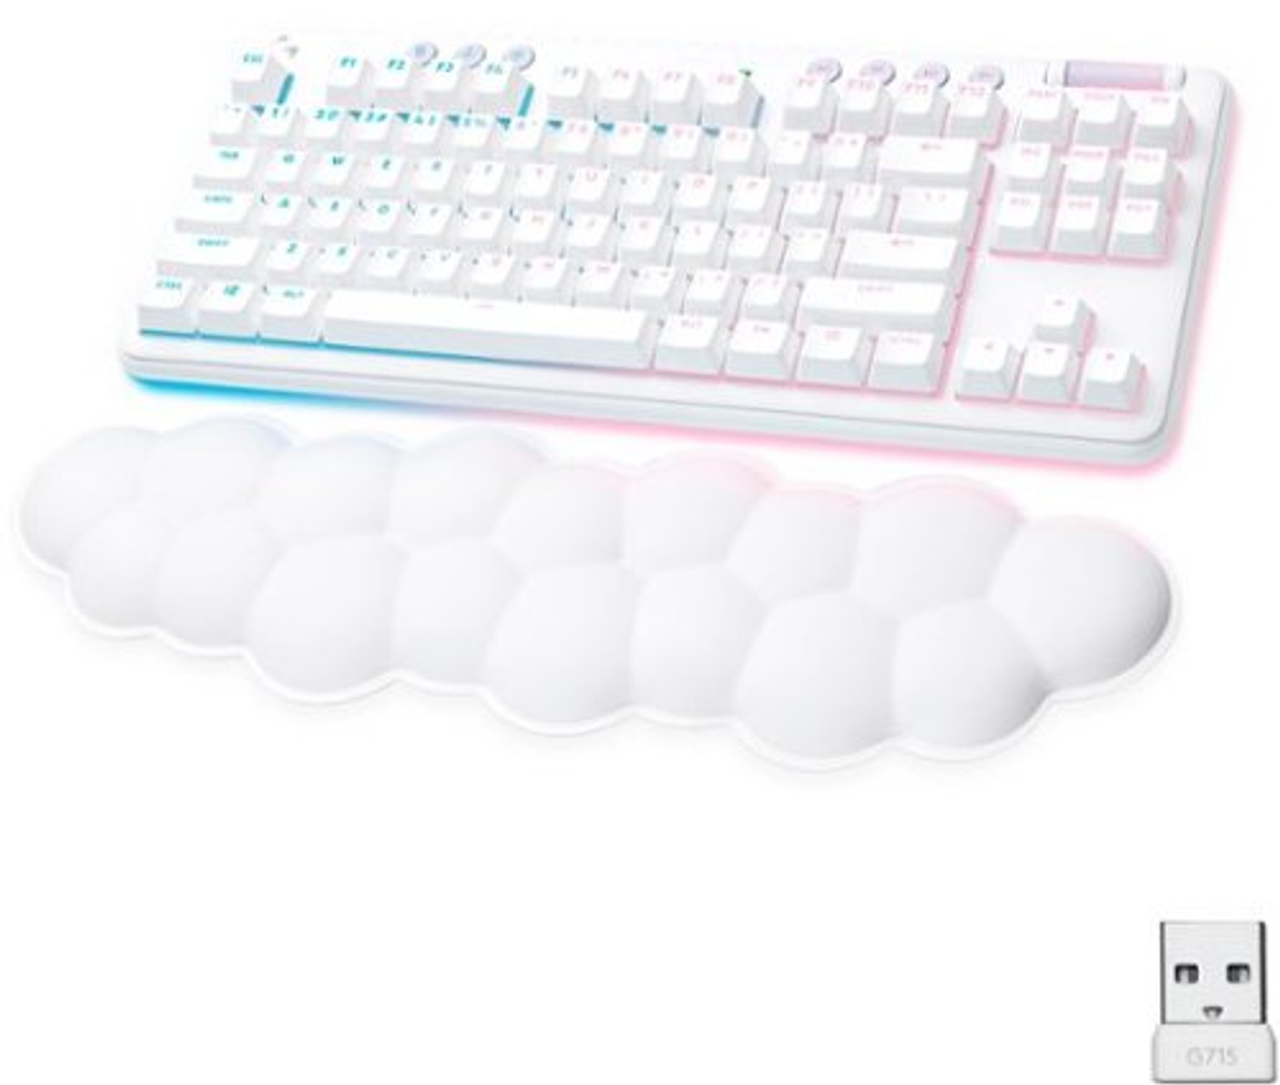 Logitech - G715 TKL Wireless Mechanical Tactile Switch Gaming Keyboard for PC/Mac with Palm Rest Included - White Mist